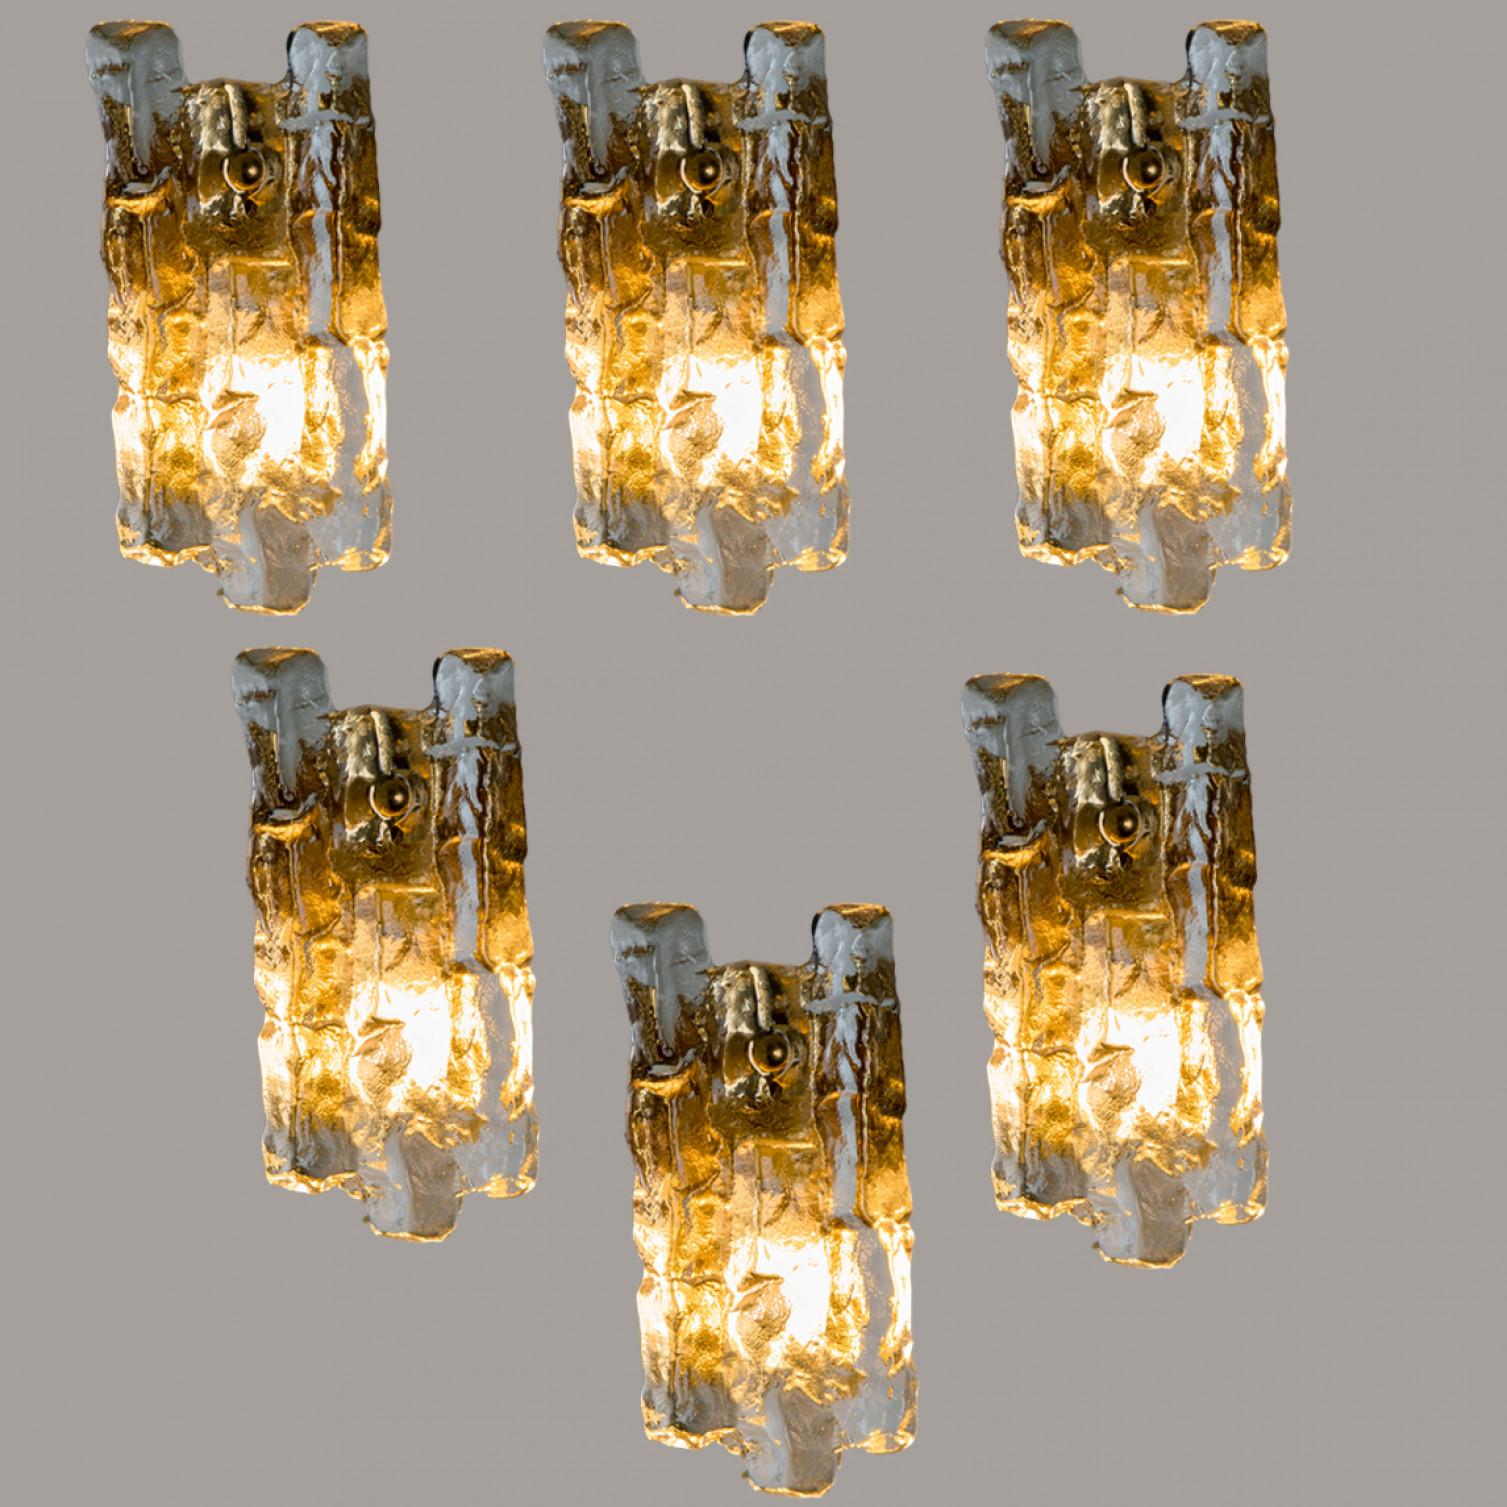 Textured Ice glass Gold Wall Lights Kalmar, 1970s For Sale 6